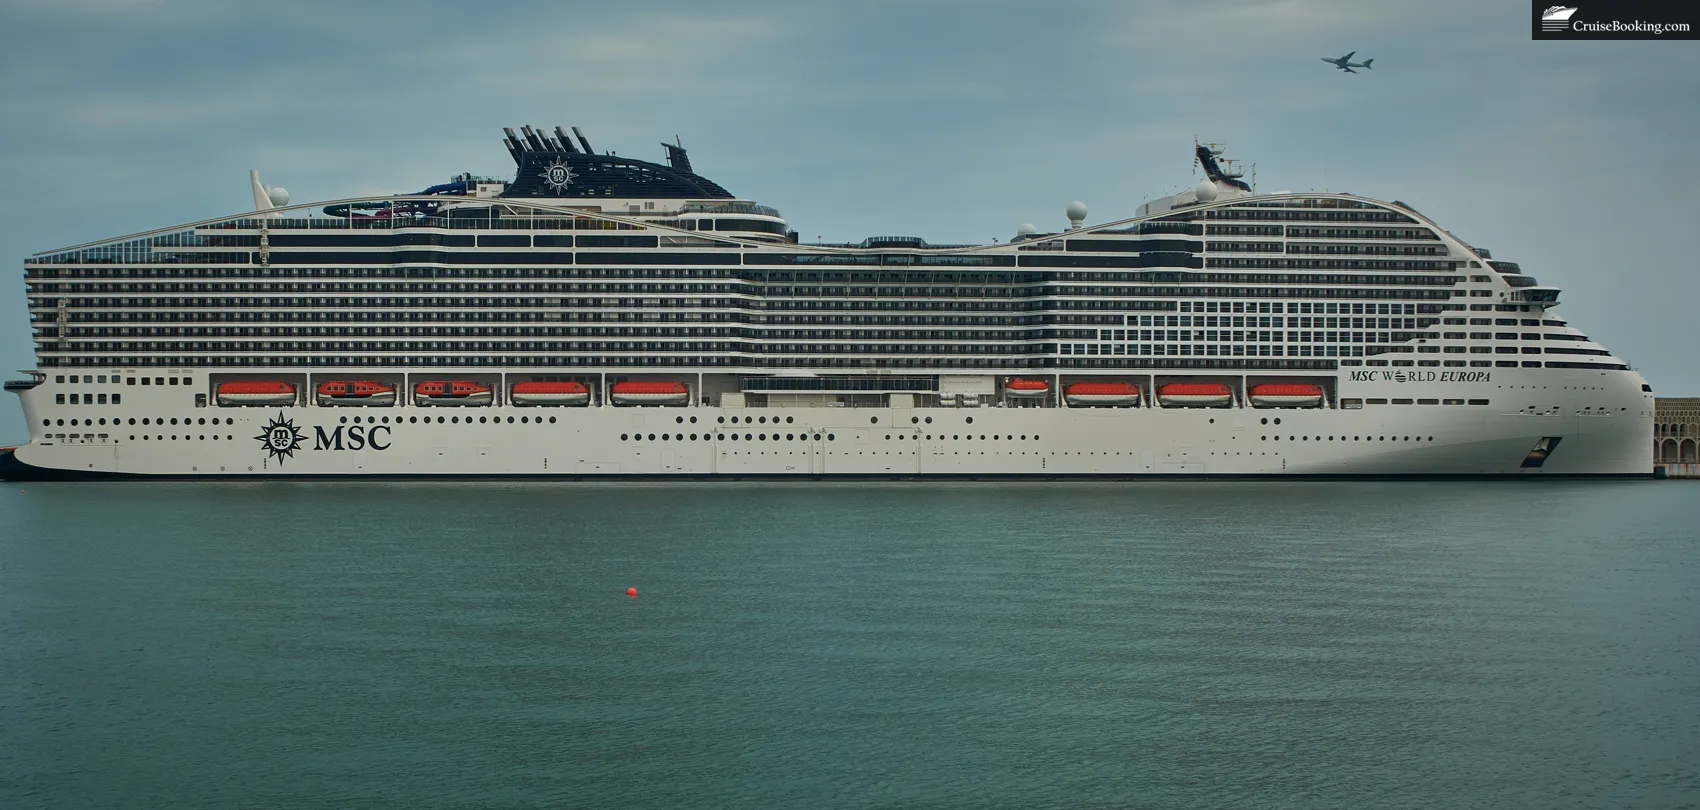 Europe-repositioning voyage sets sail on MSC World Europa